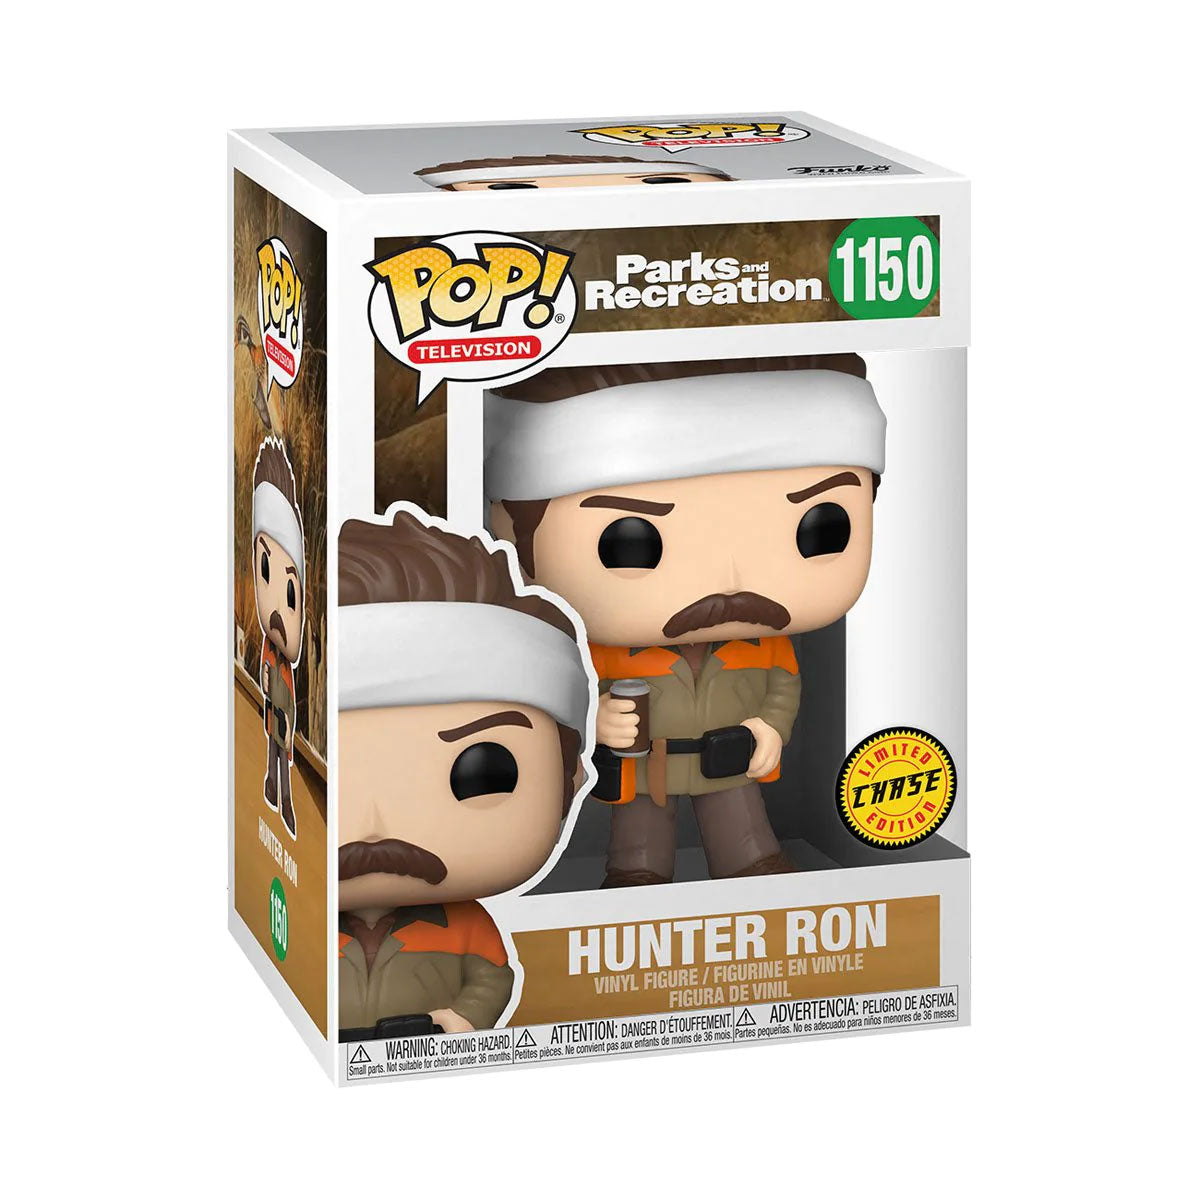 FUNKO POP TV PARKS AND RECREATION HUNTER RON CHASE  1150